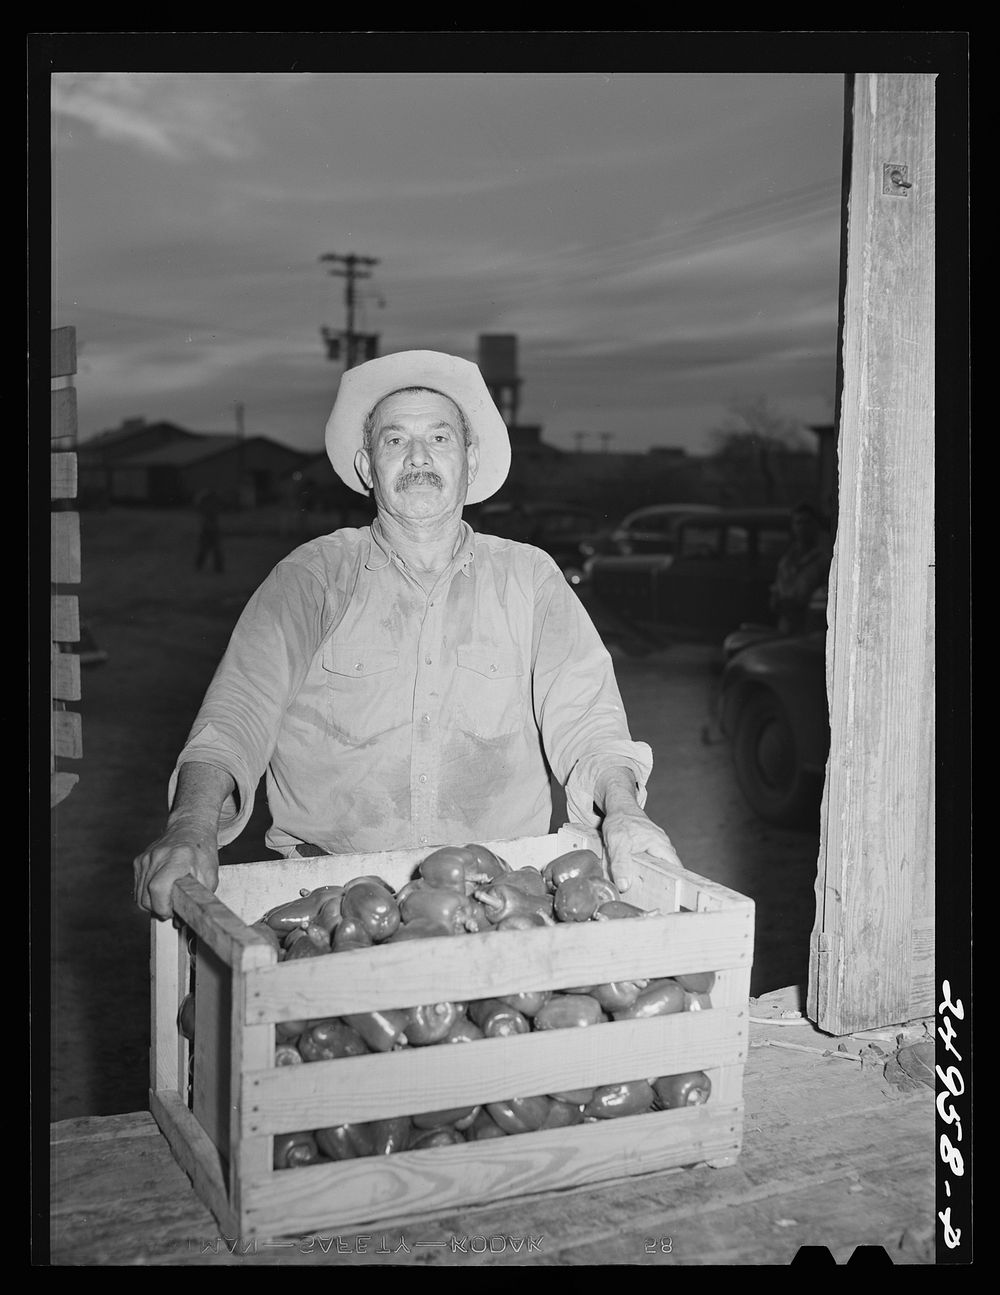 Weslaco, Texas. Peppers at packing shed. Sourced from the Library of Congress.